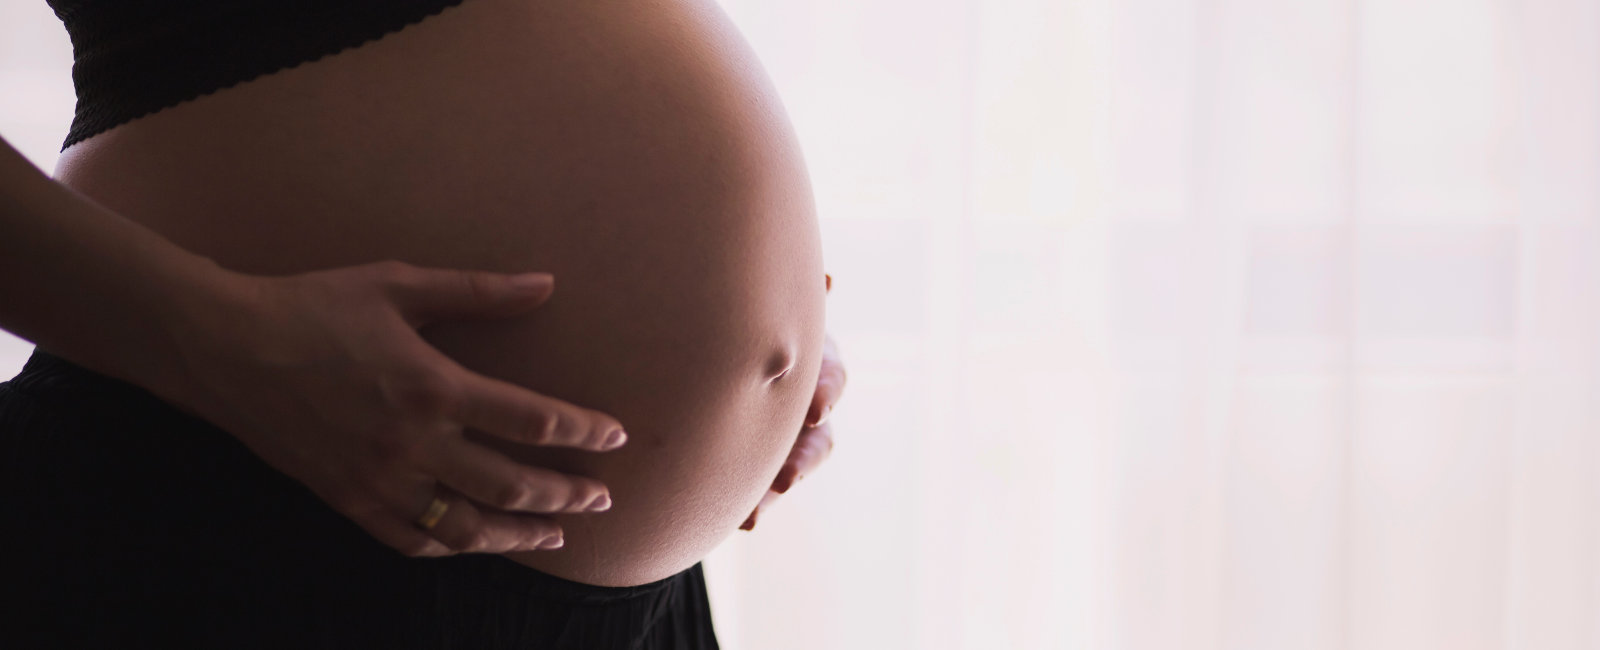 Buying Whole Life Insurance While Pregnant